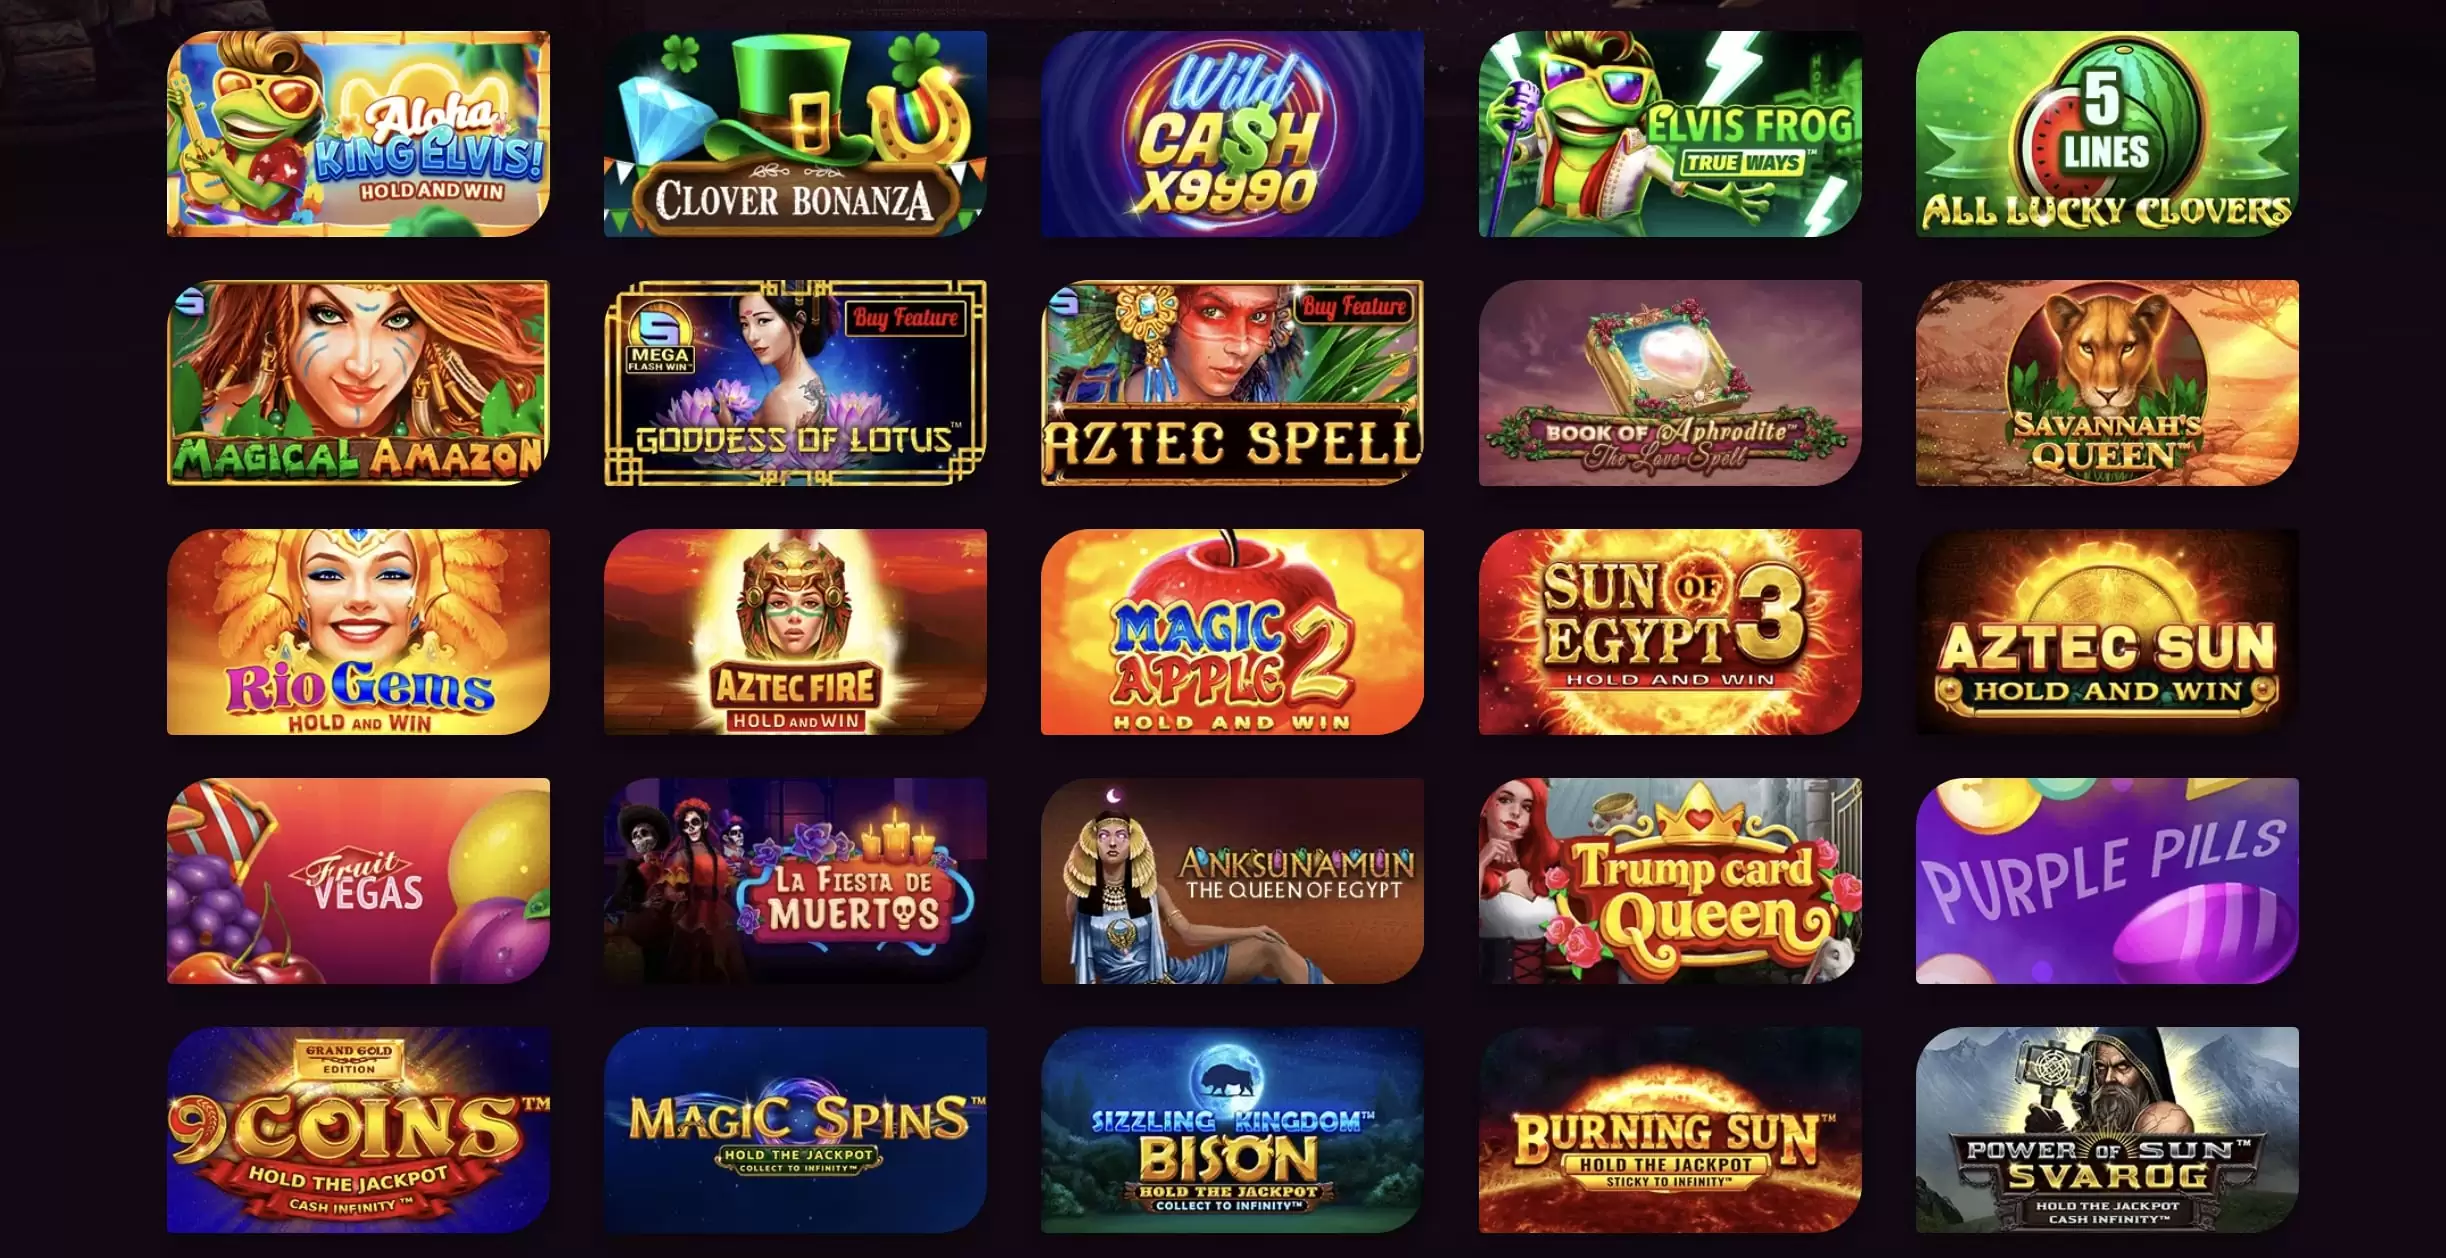 Huge choice of casino games